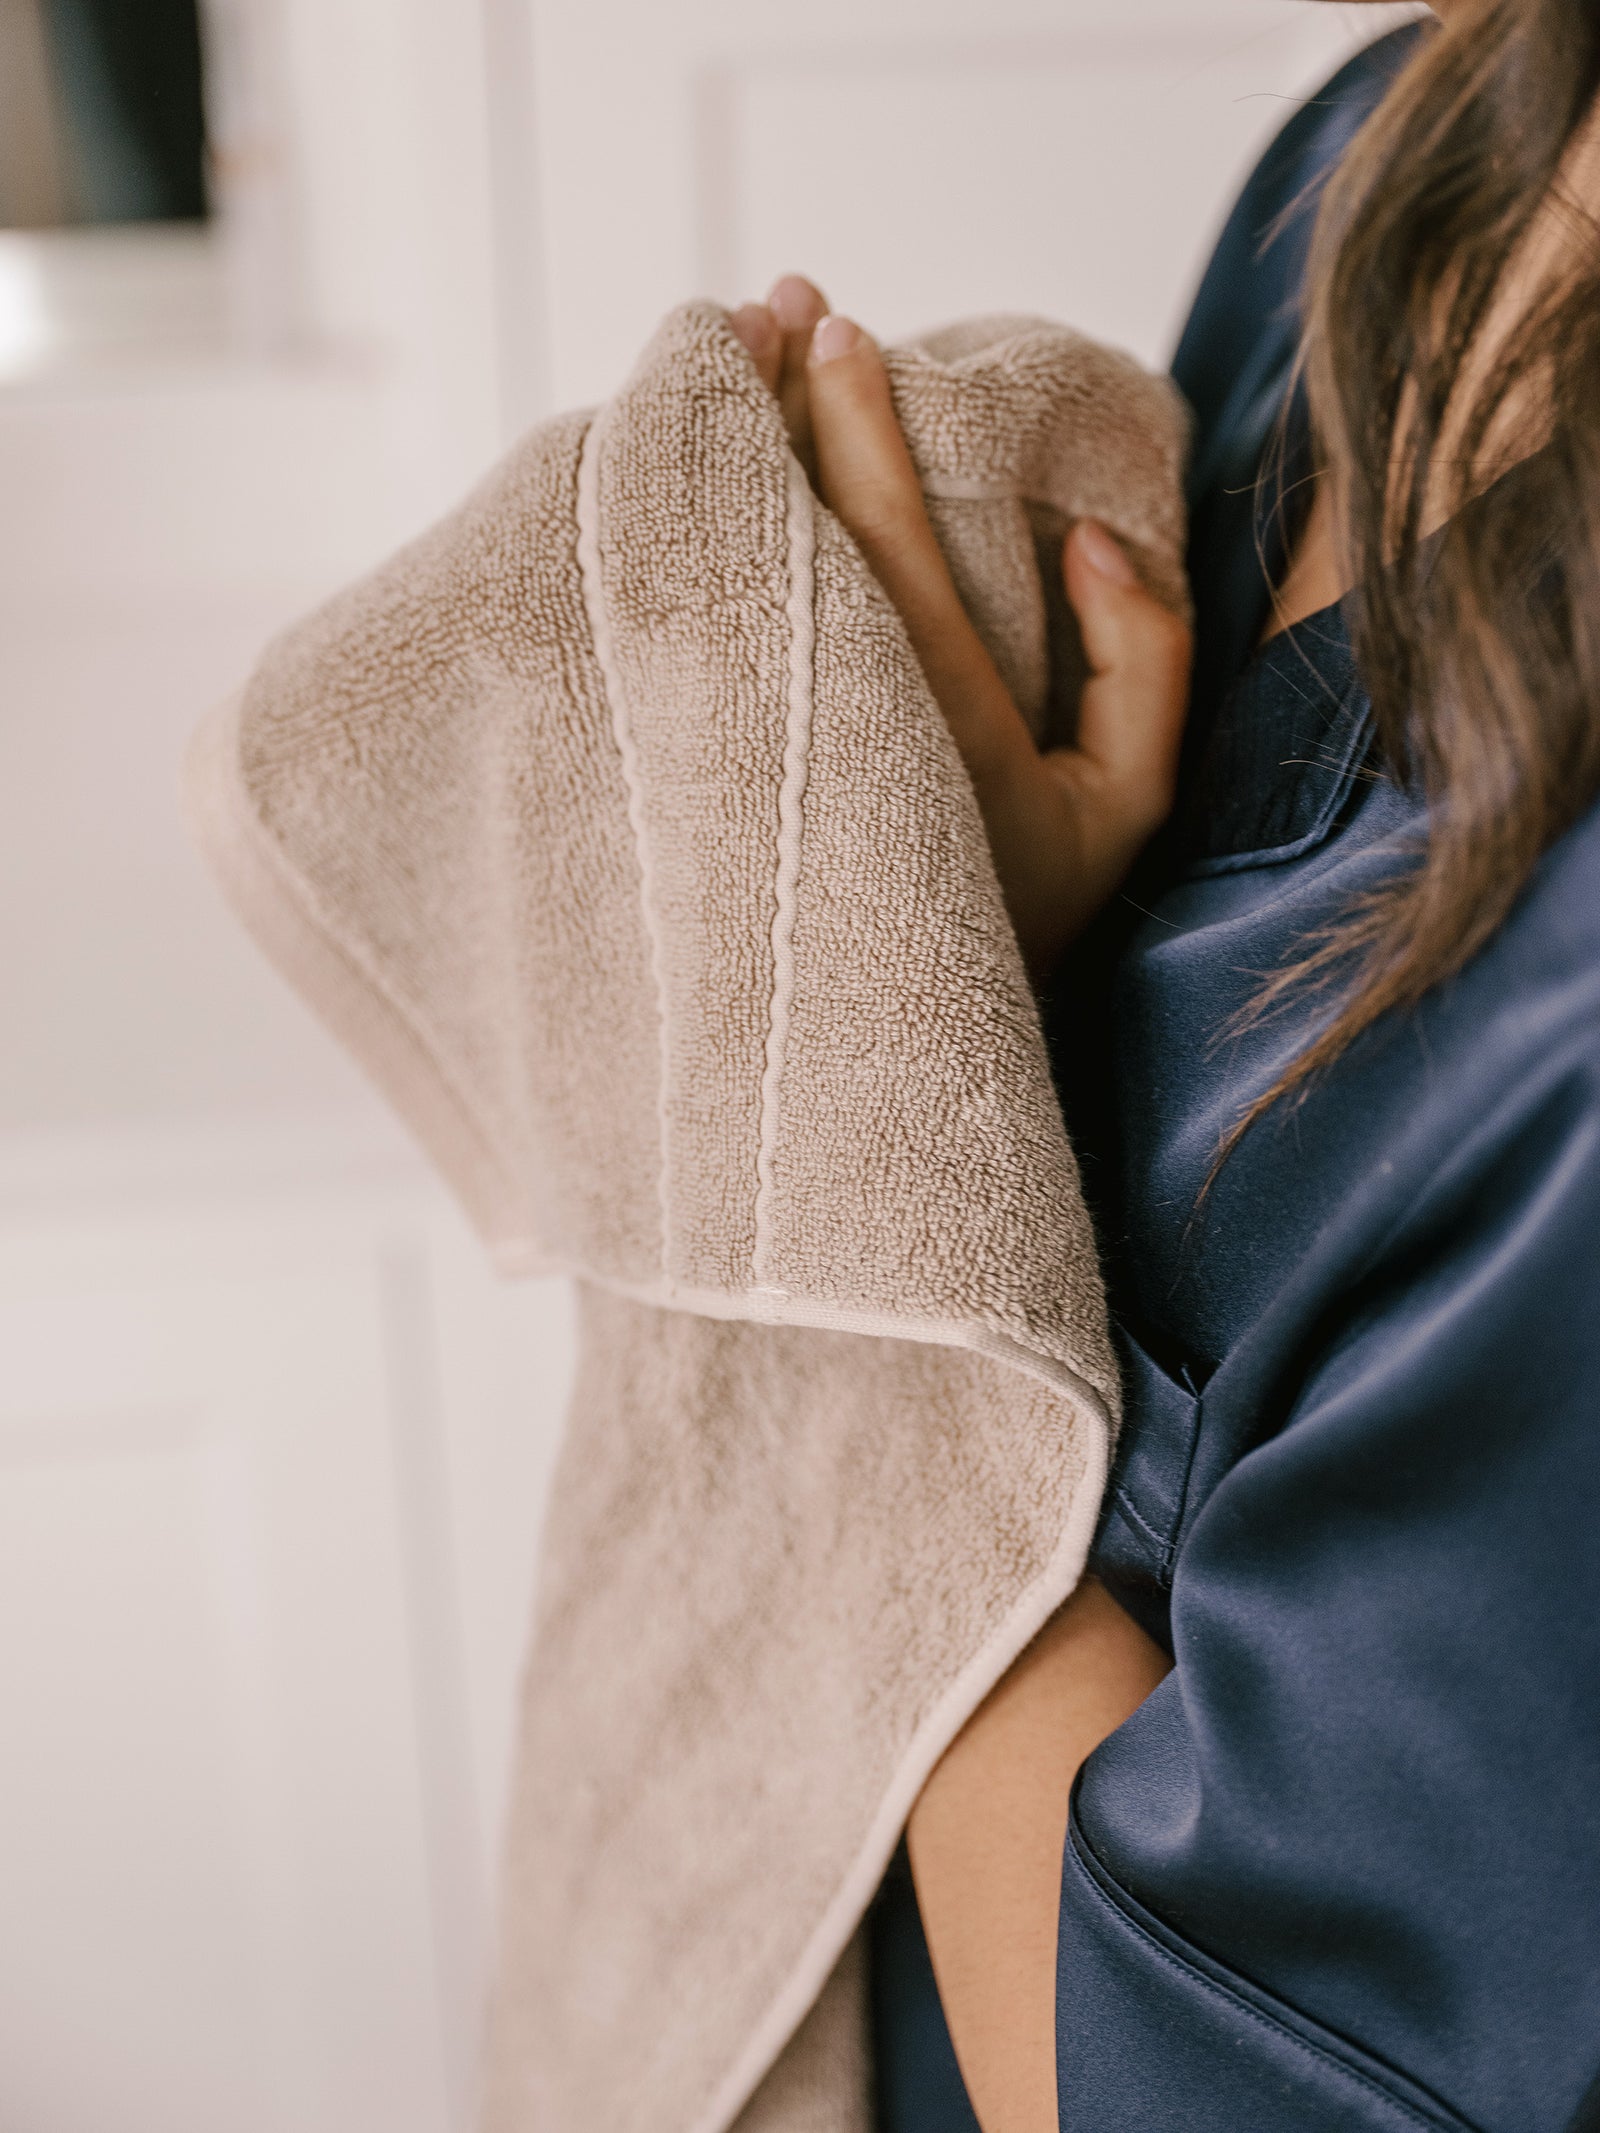 Premium Plush Hand Towels in the color sand. Photo of Premium Plush Hand Towel taken in a bathroom with a woman holding the towel close to her body. 